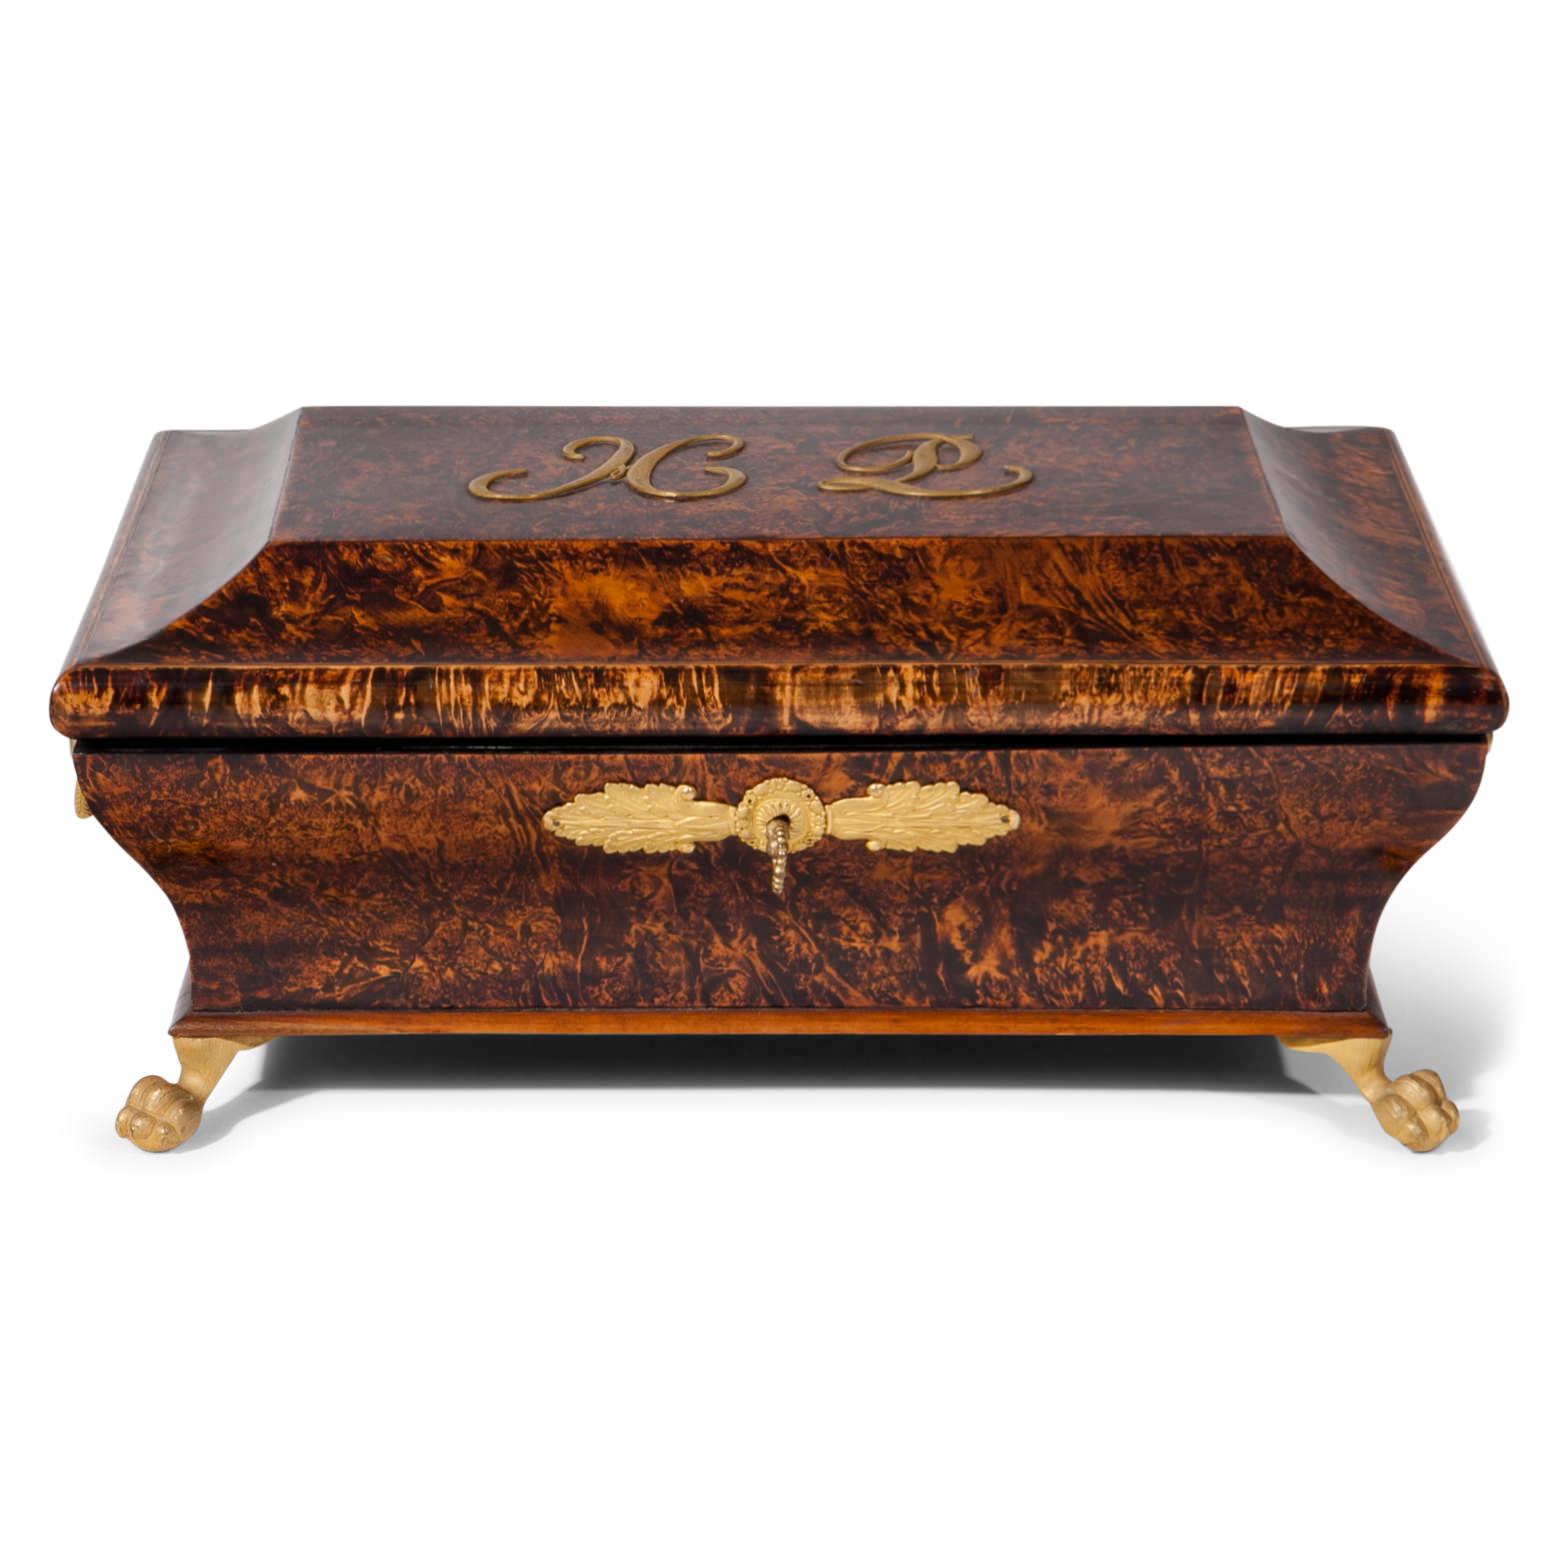 French Charles X burl wood box, standing on bronze ball-and-claw feet. The body is slightly curved and the lid shows the monogram ML. The key exists.